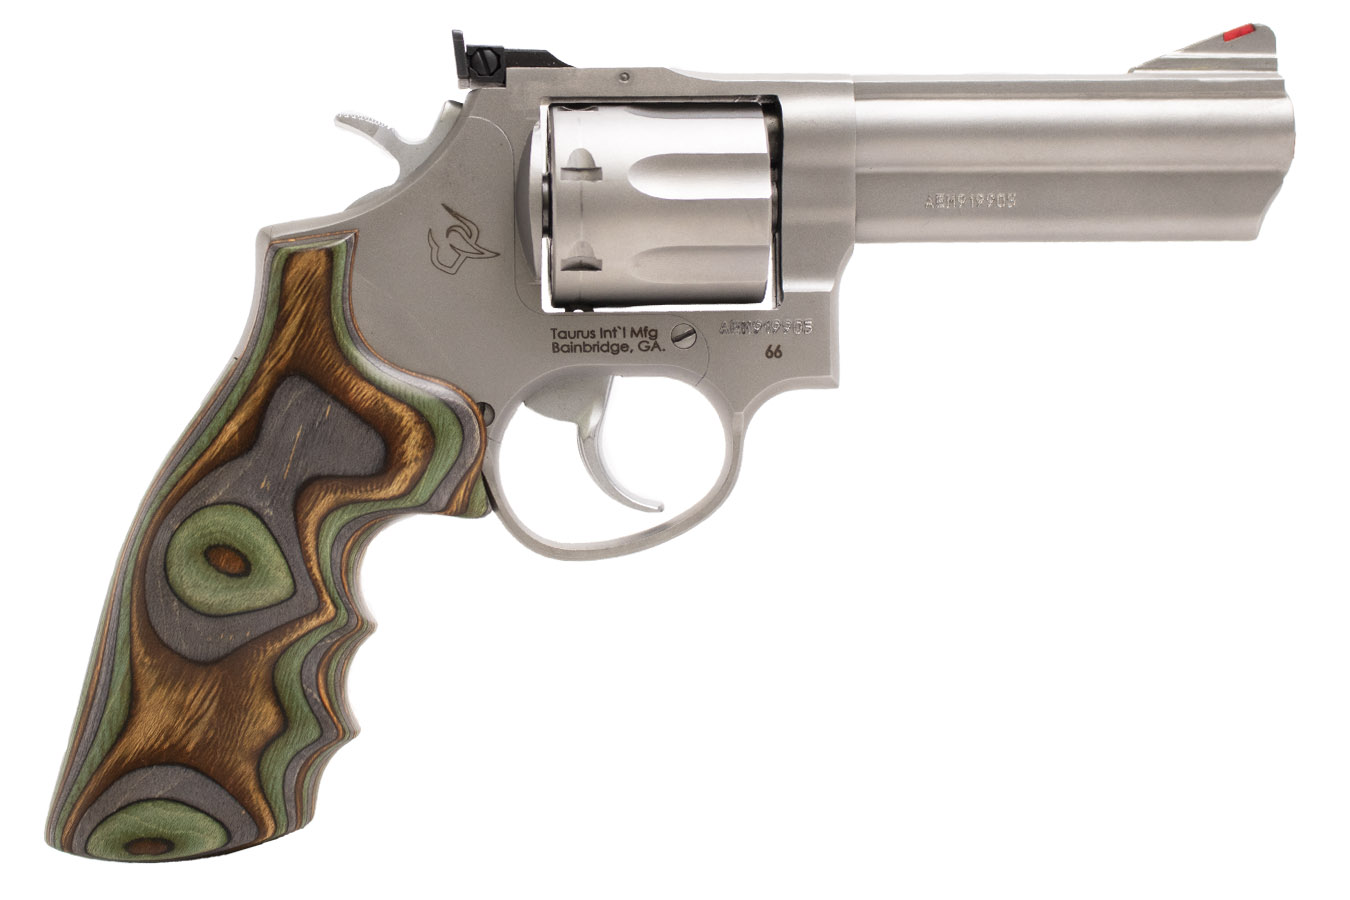 No. 8 Best Selling: TAURUS M66 357MAG SS 4 IN 7 RDS CAMO WOOD GRIPS